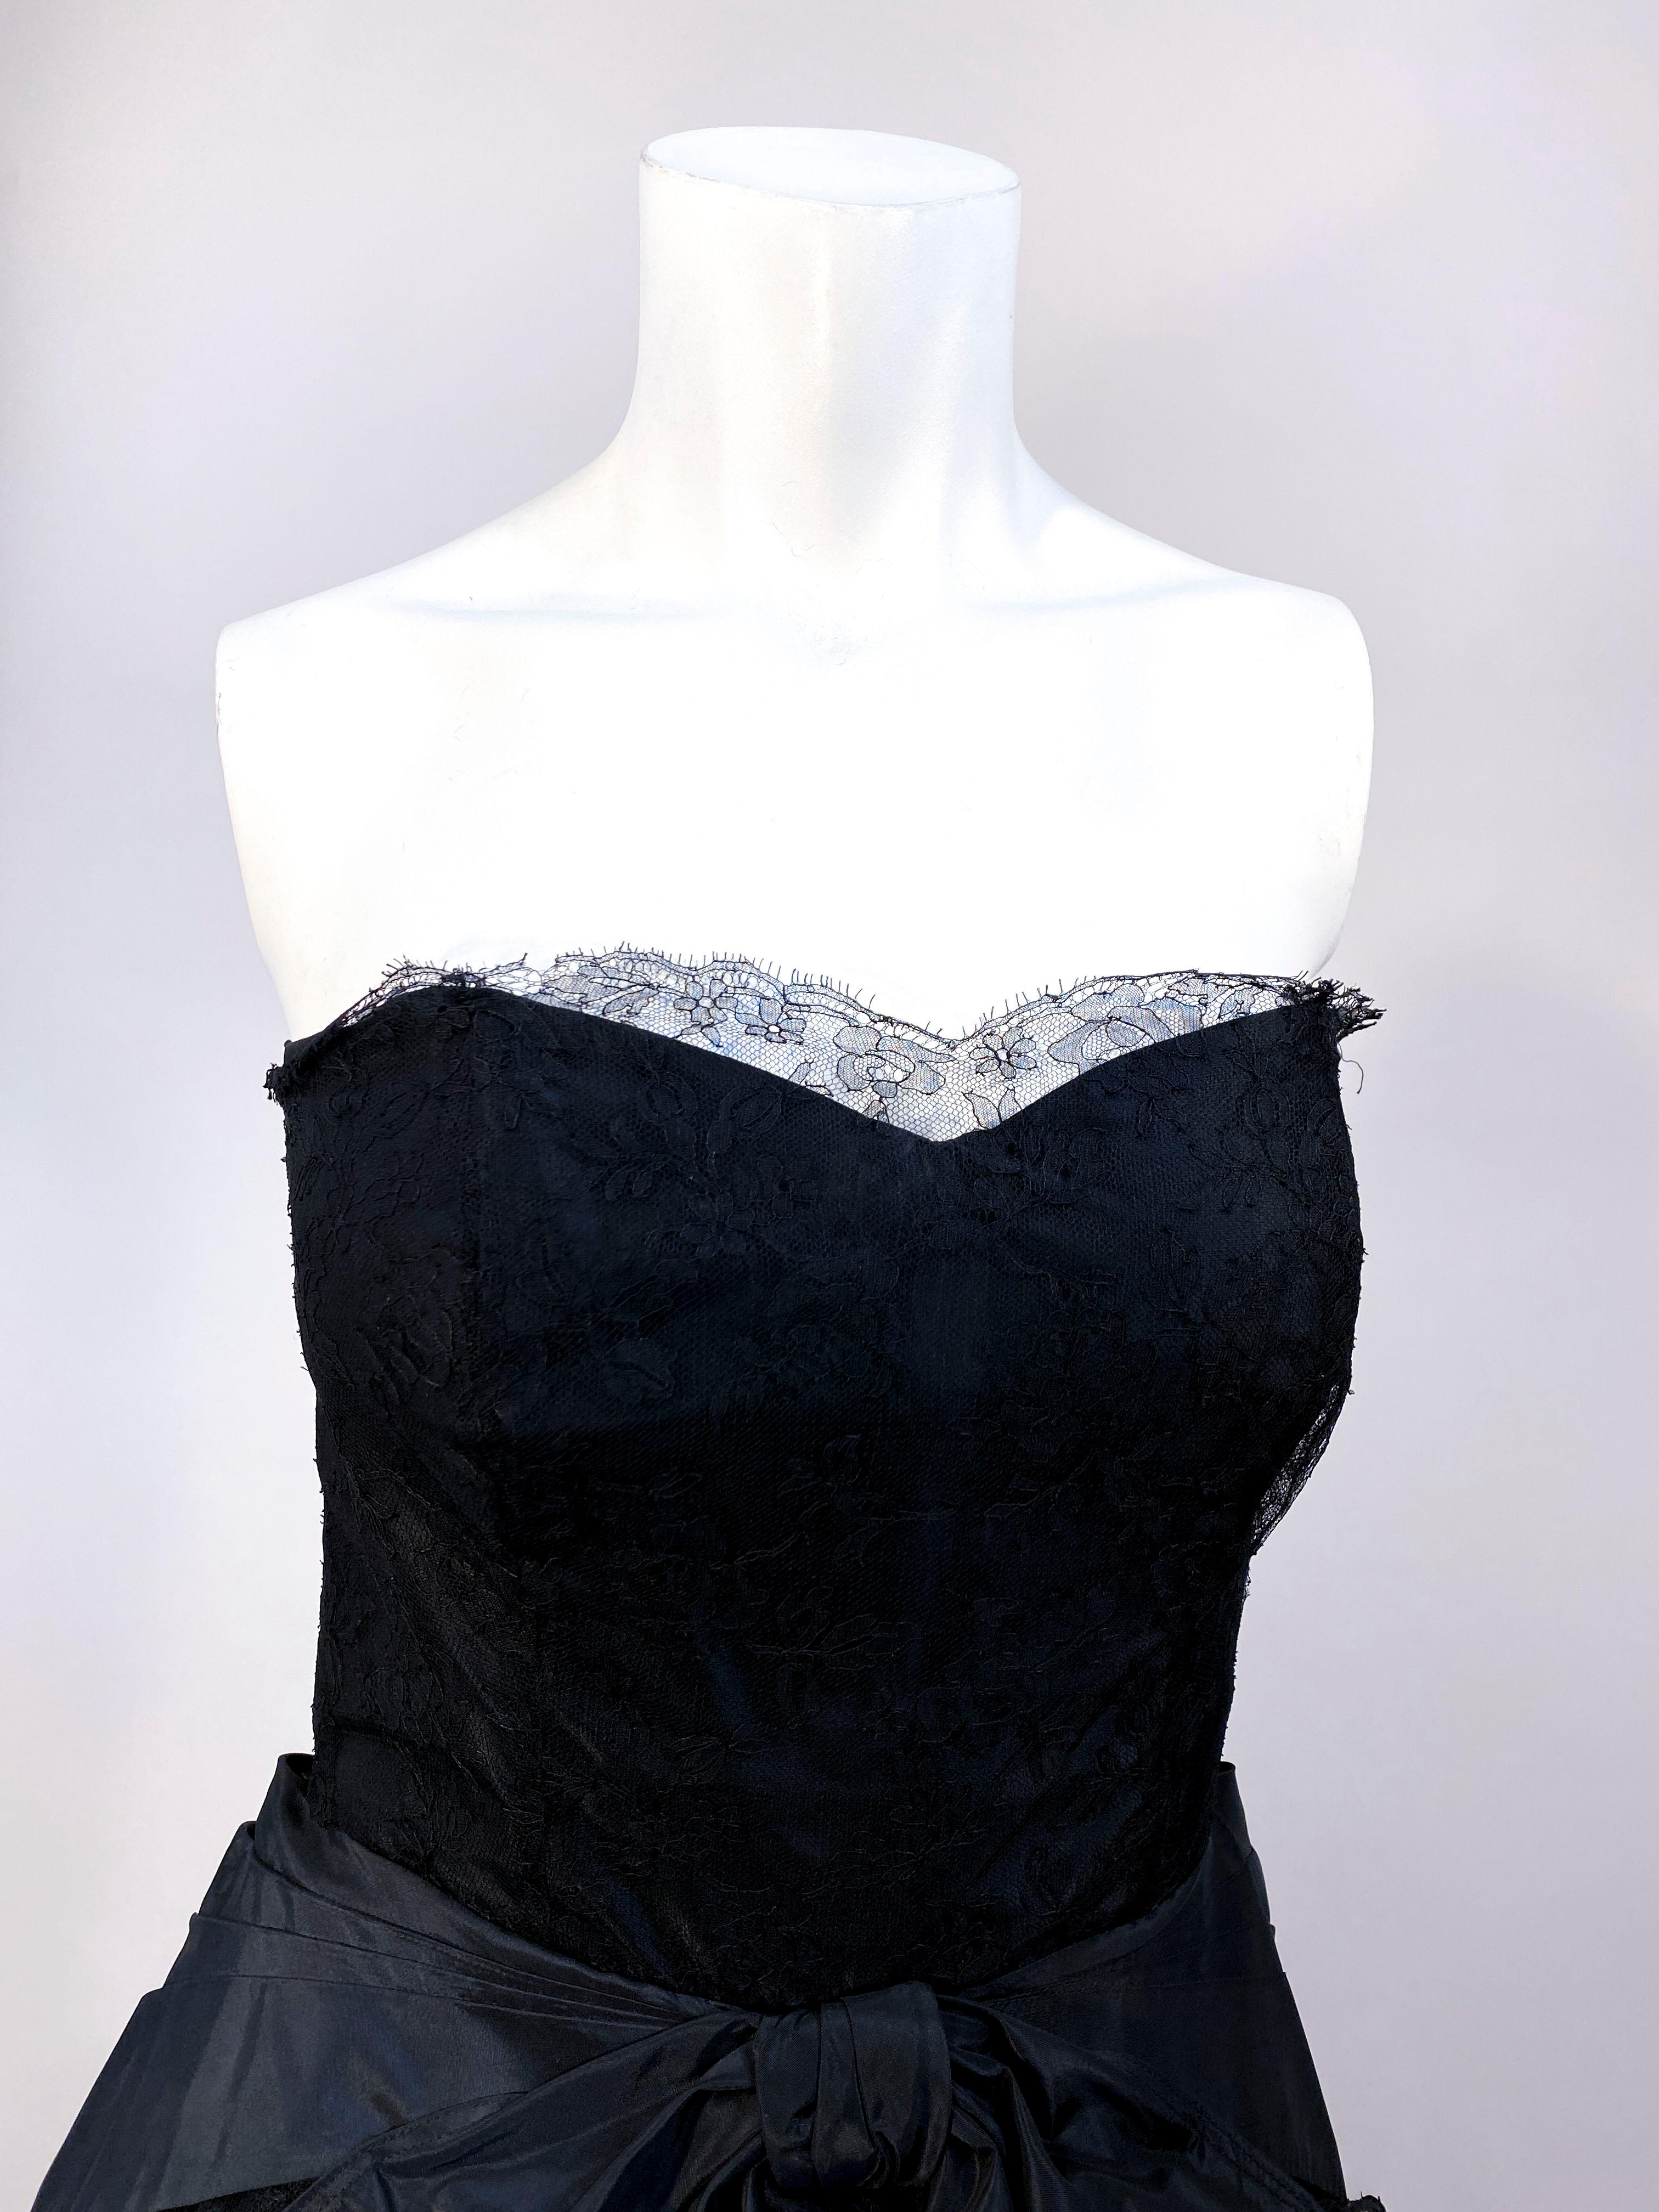 Late 1940s black full-length taffeta ball gown with Chantilly lace trim along the strapless bodice, an enlarged bow, a faux bustle in the back that is pleated and goes down three-fourths of the way down the skirt, metal side zip closure, and banning